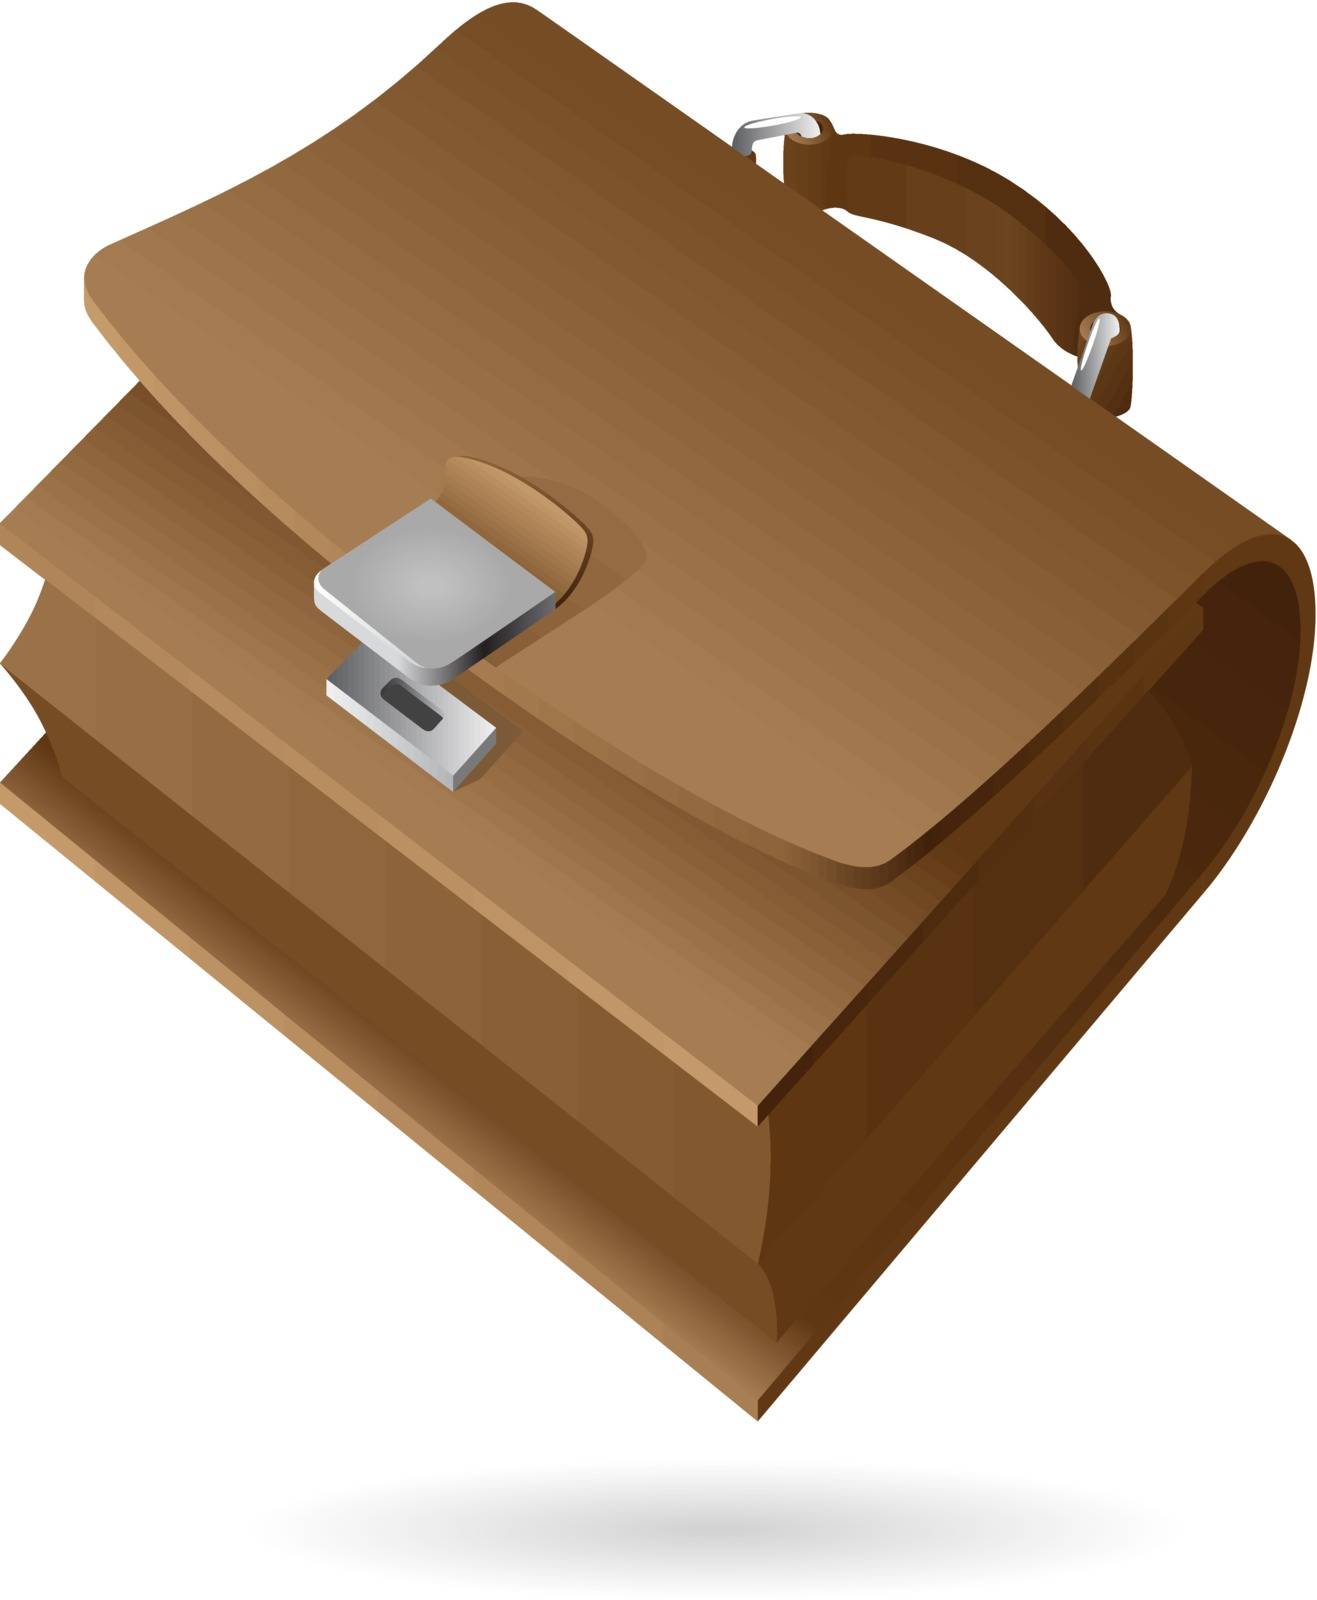 Isometric icon of brief-case. Vector illustration.